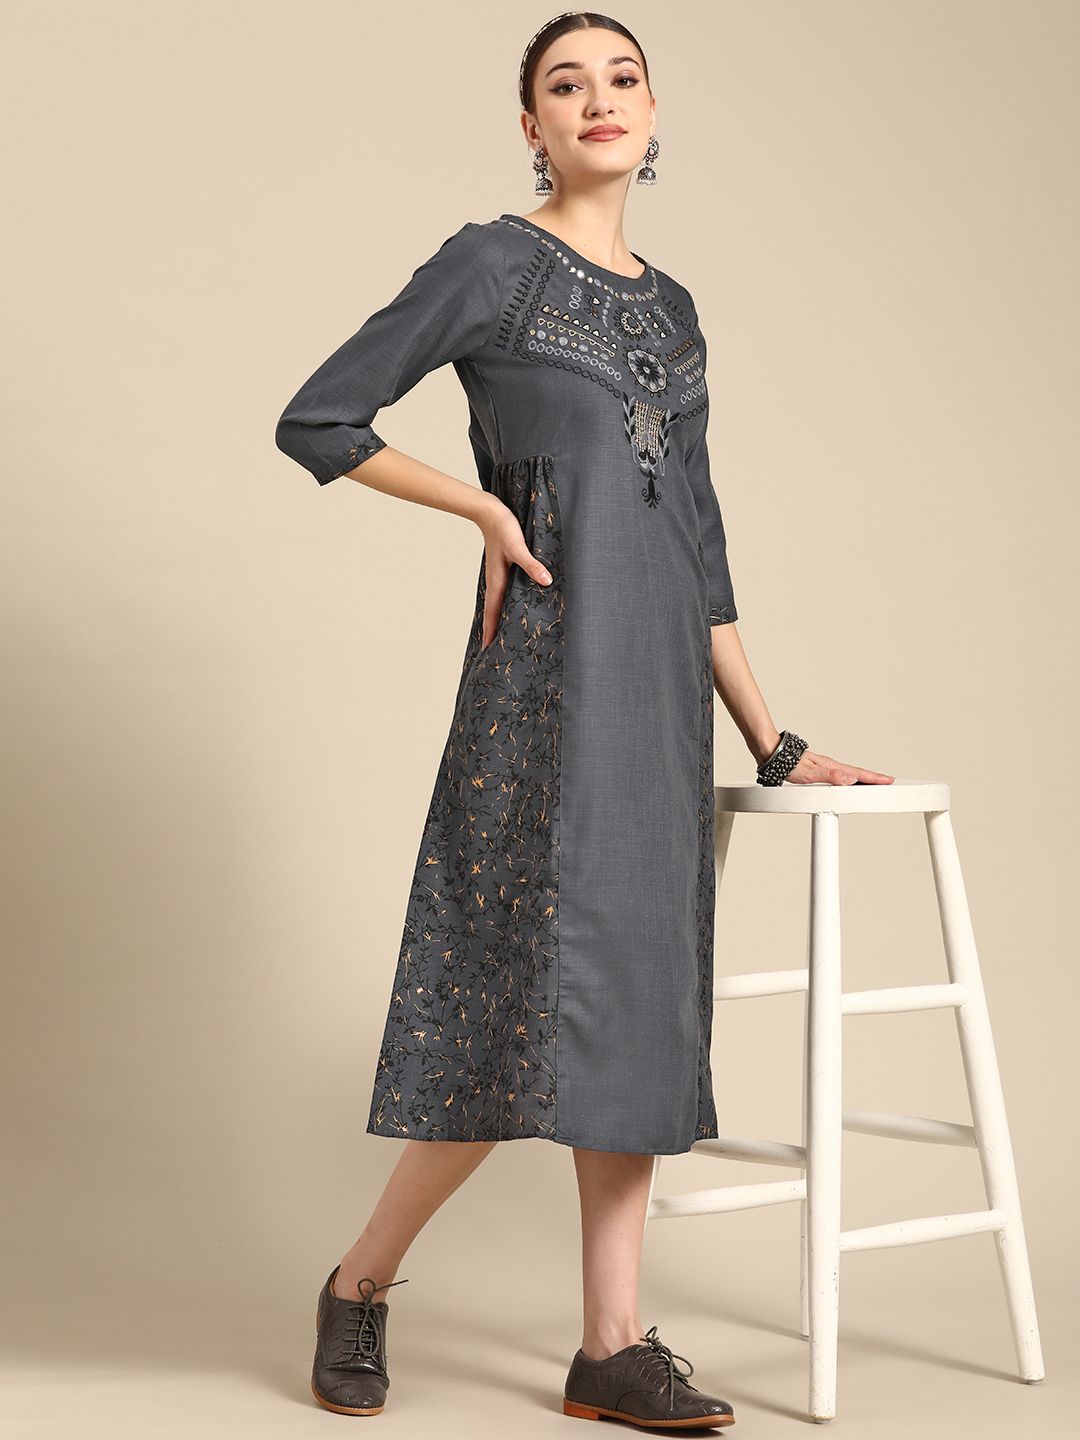 Sangria Grey Ethnic Motifs Embroidered Ethnic Cotton A-Line Midi Dress Price in India